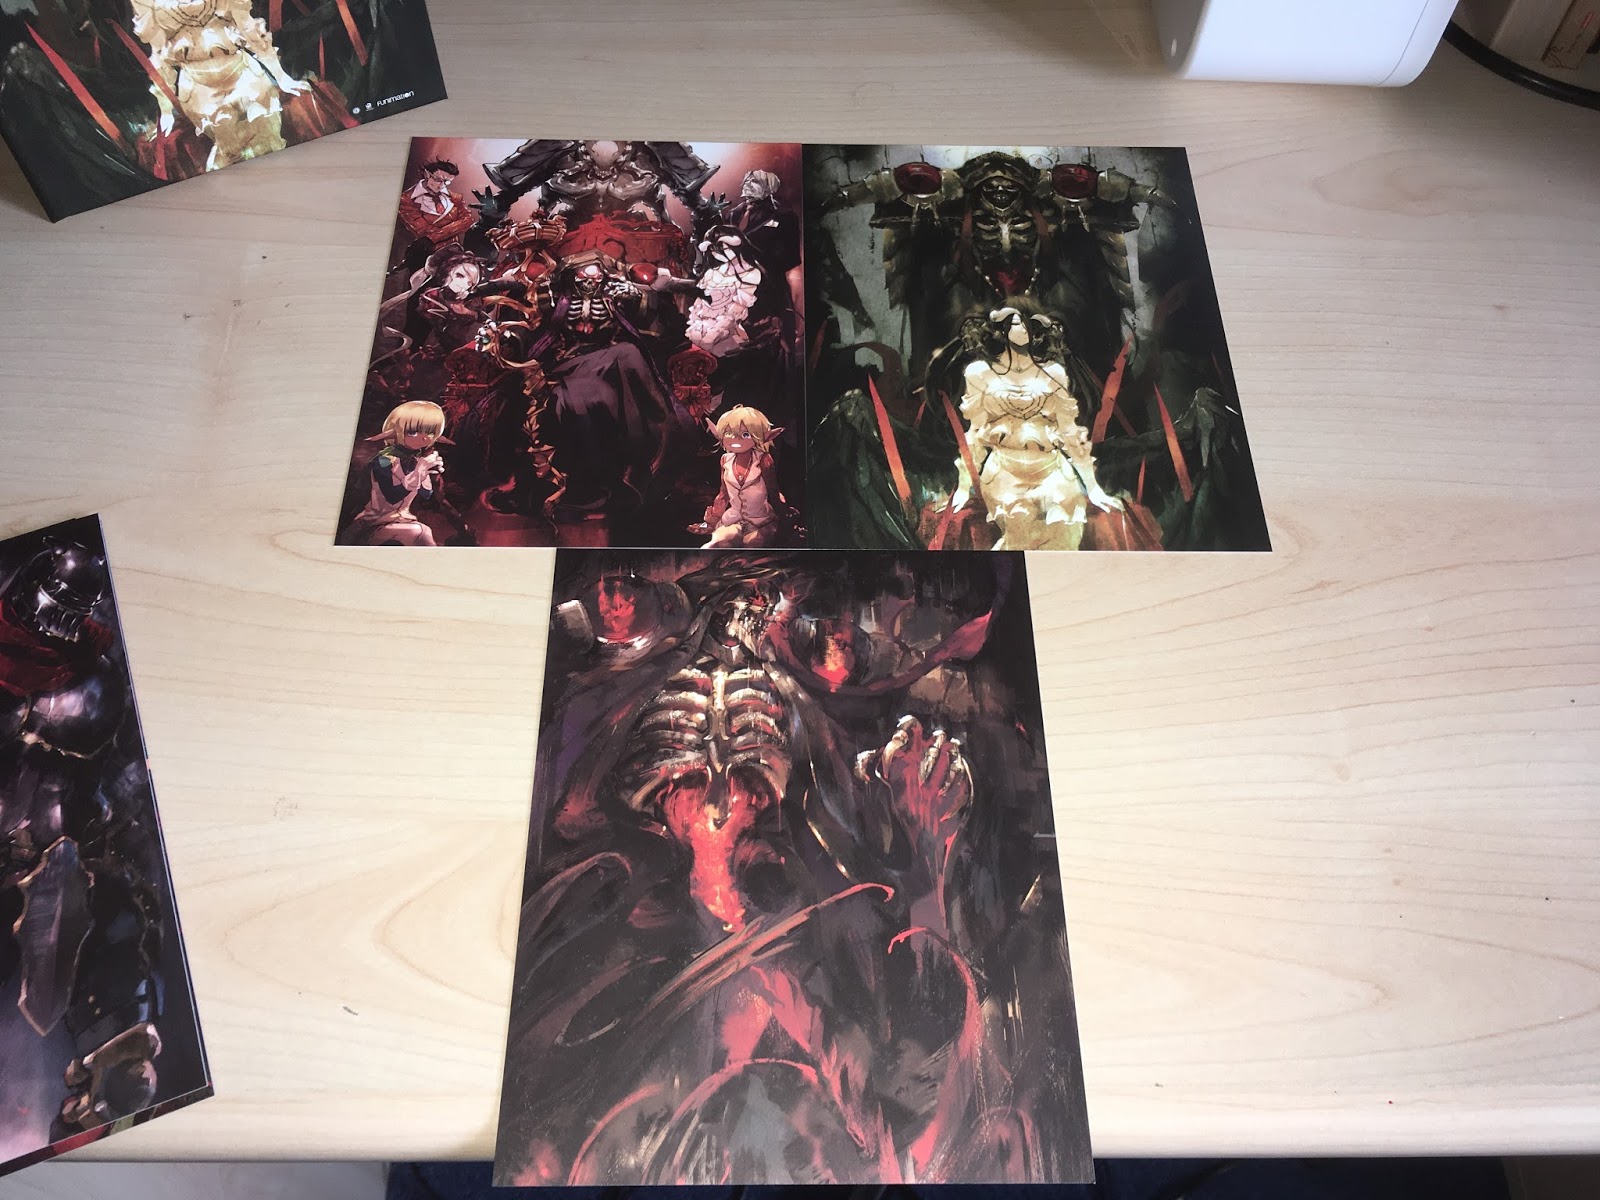 Unboxing] Overlord – All the Anime